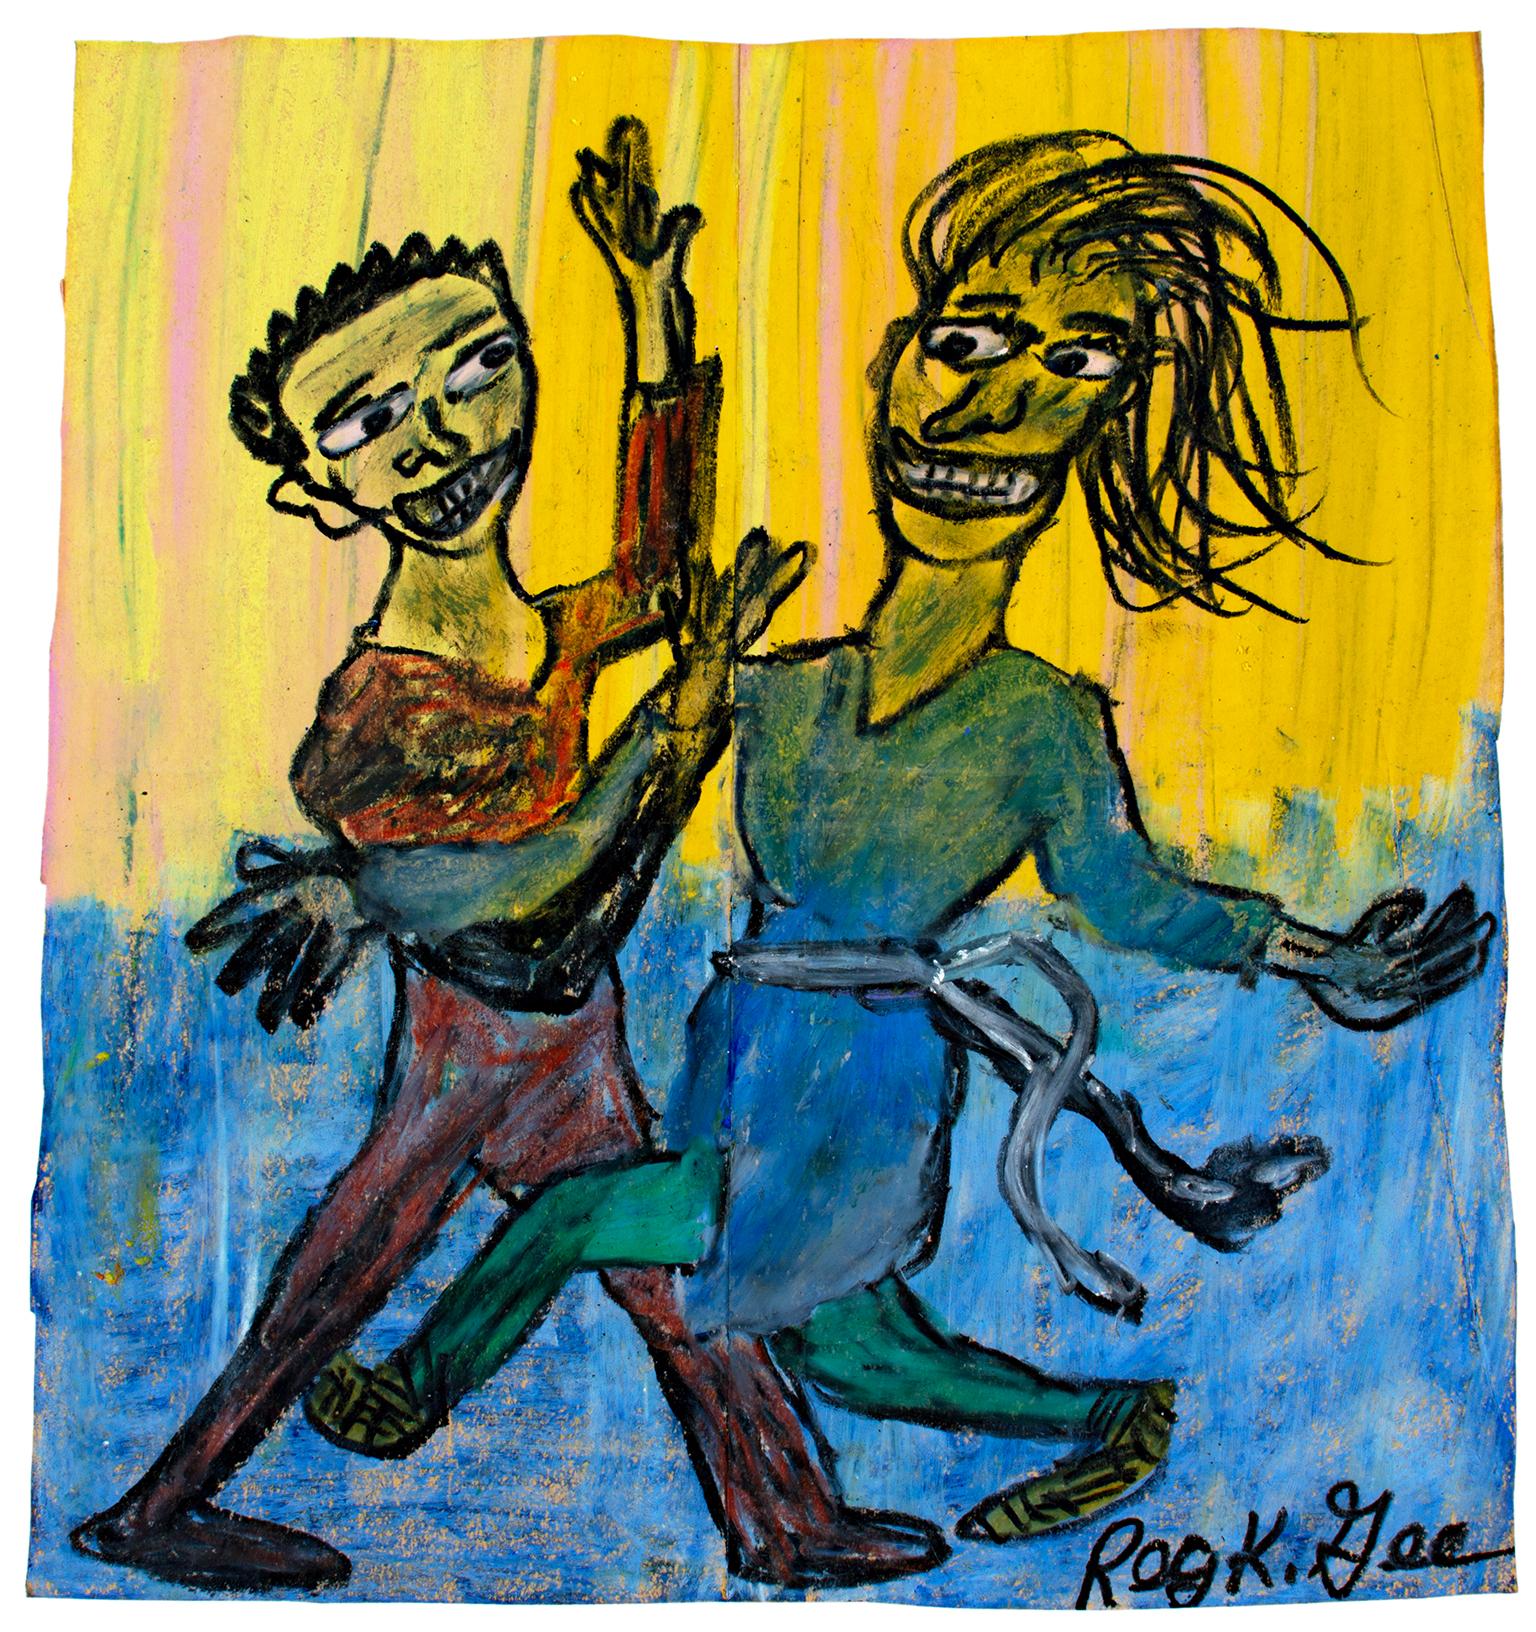 "Dance Studio" is an original oil pastel drawing on a grocery bag by Reginald K. Gee. The artist signed the piece lower right as well as signing and dating it on the back. It depicts two people dancing in a yellow and blue dance studio. 

13 1/4" x